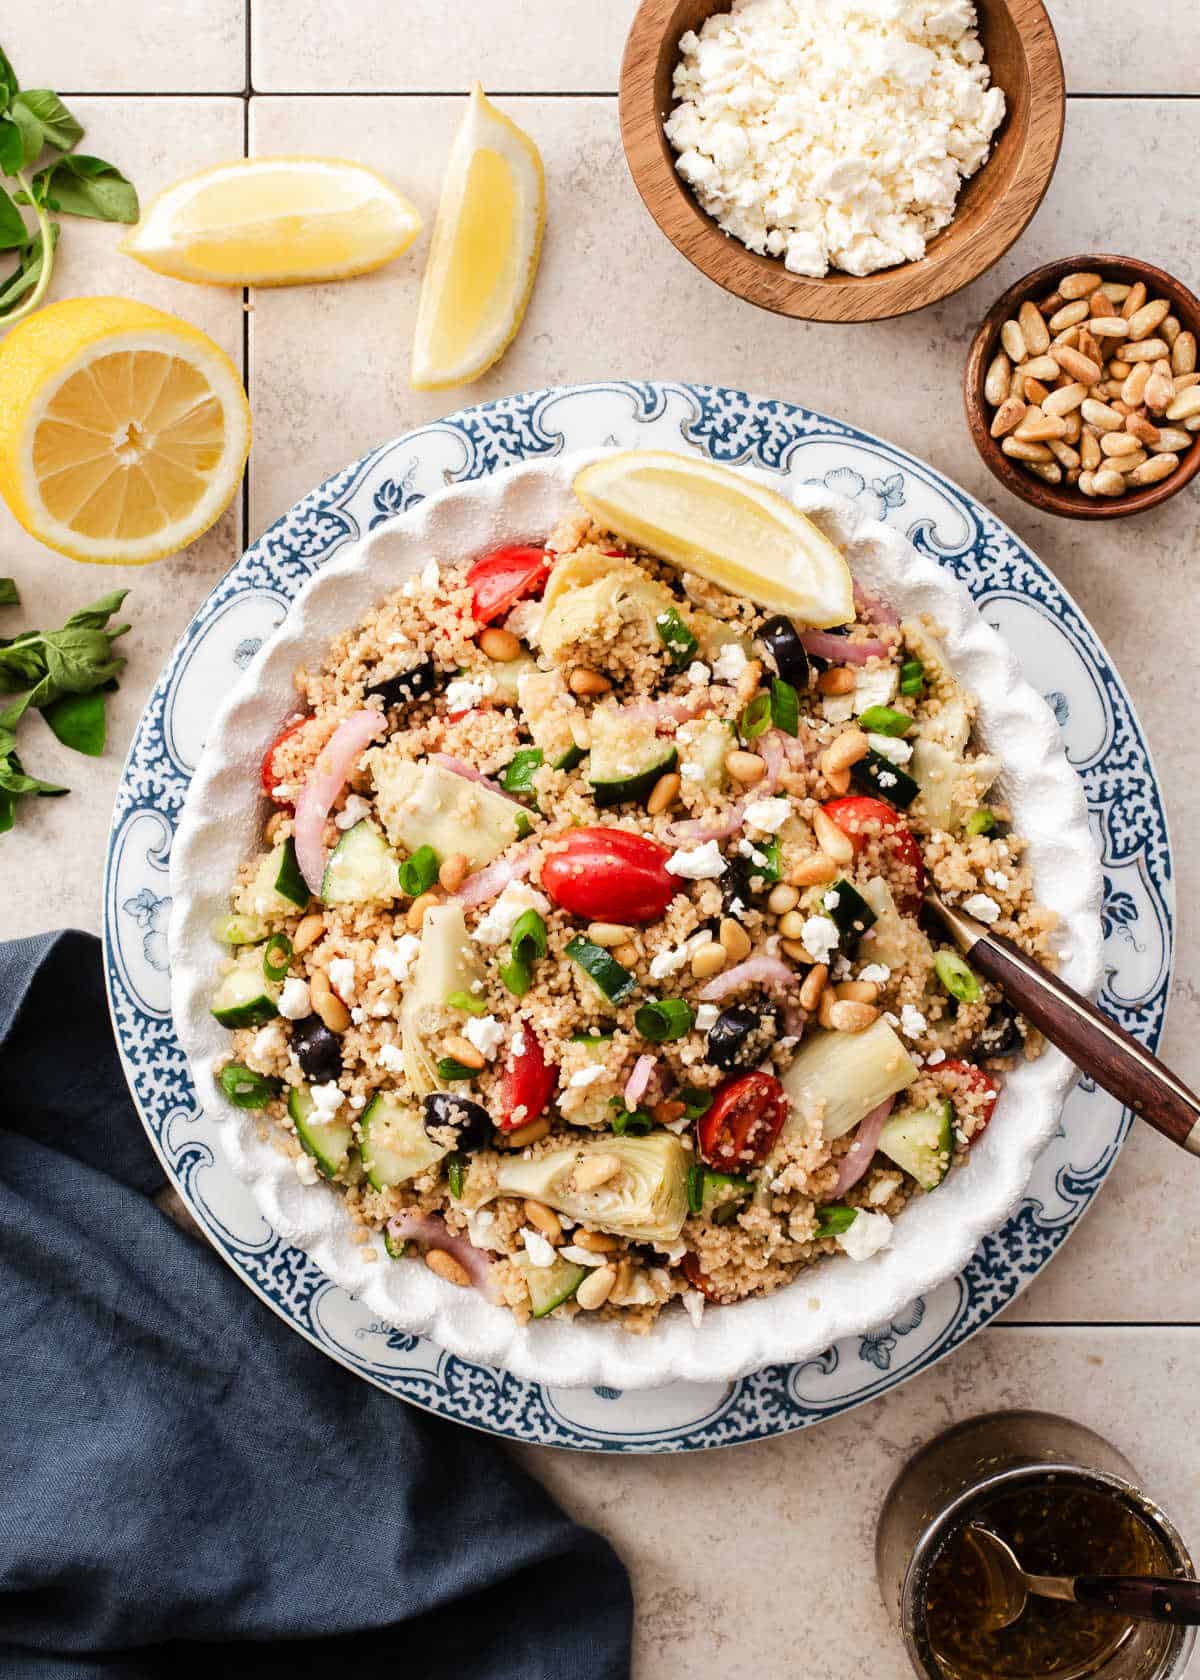 round bowl filled with couscous salad full of veggies, layered on blue and white plate surrounded by lemons, dressing and pine nuts.